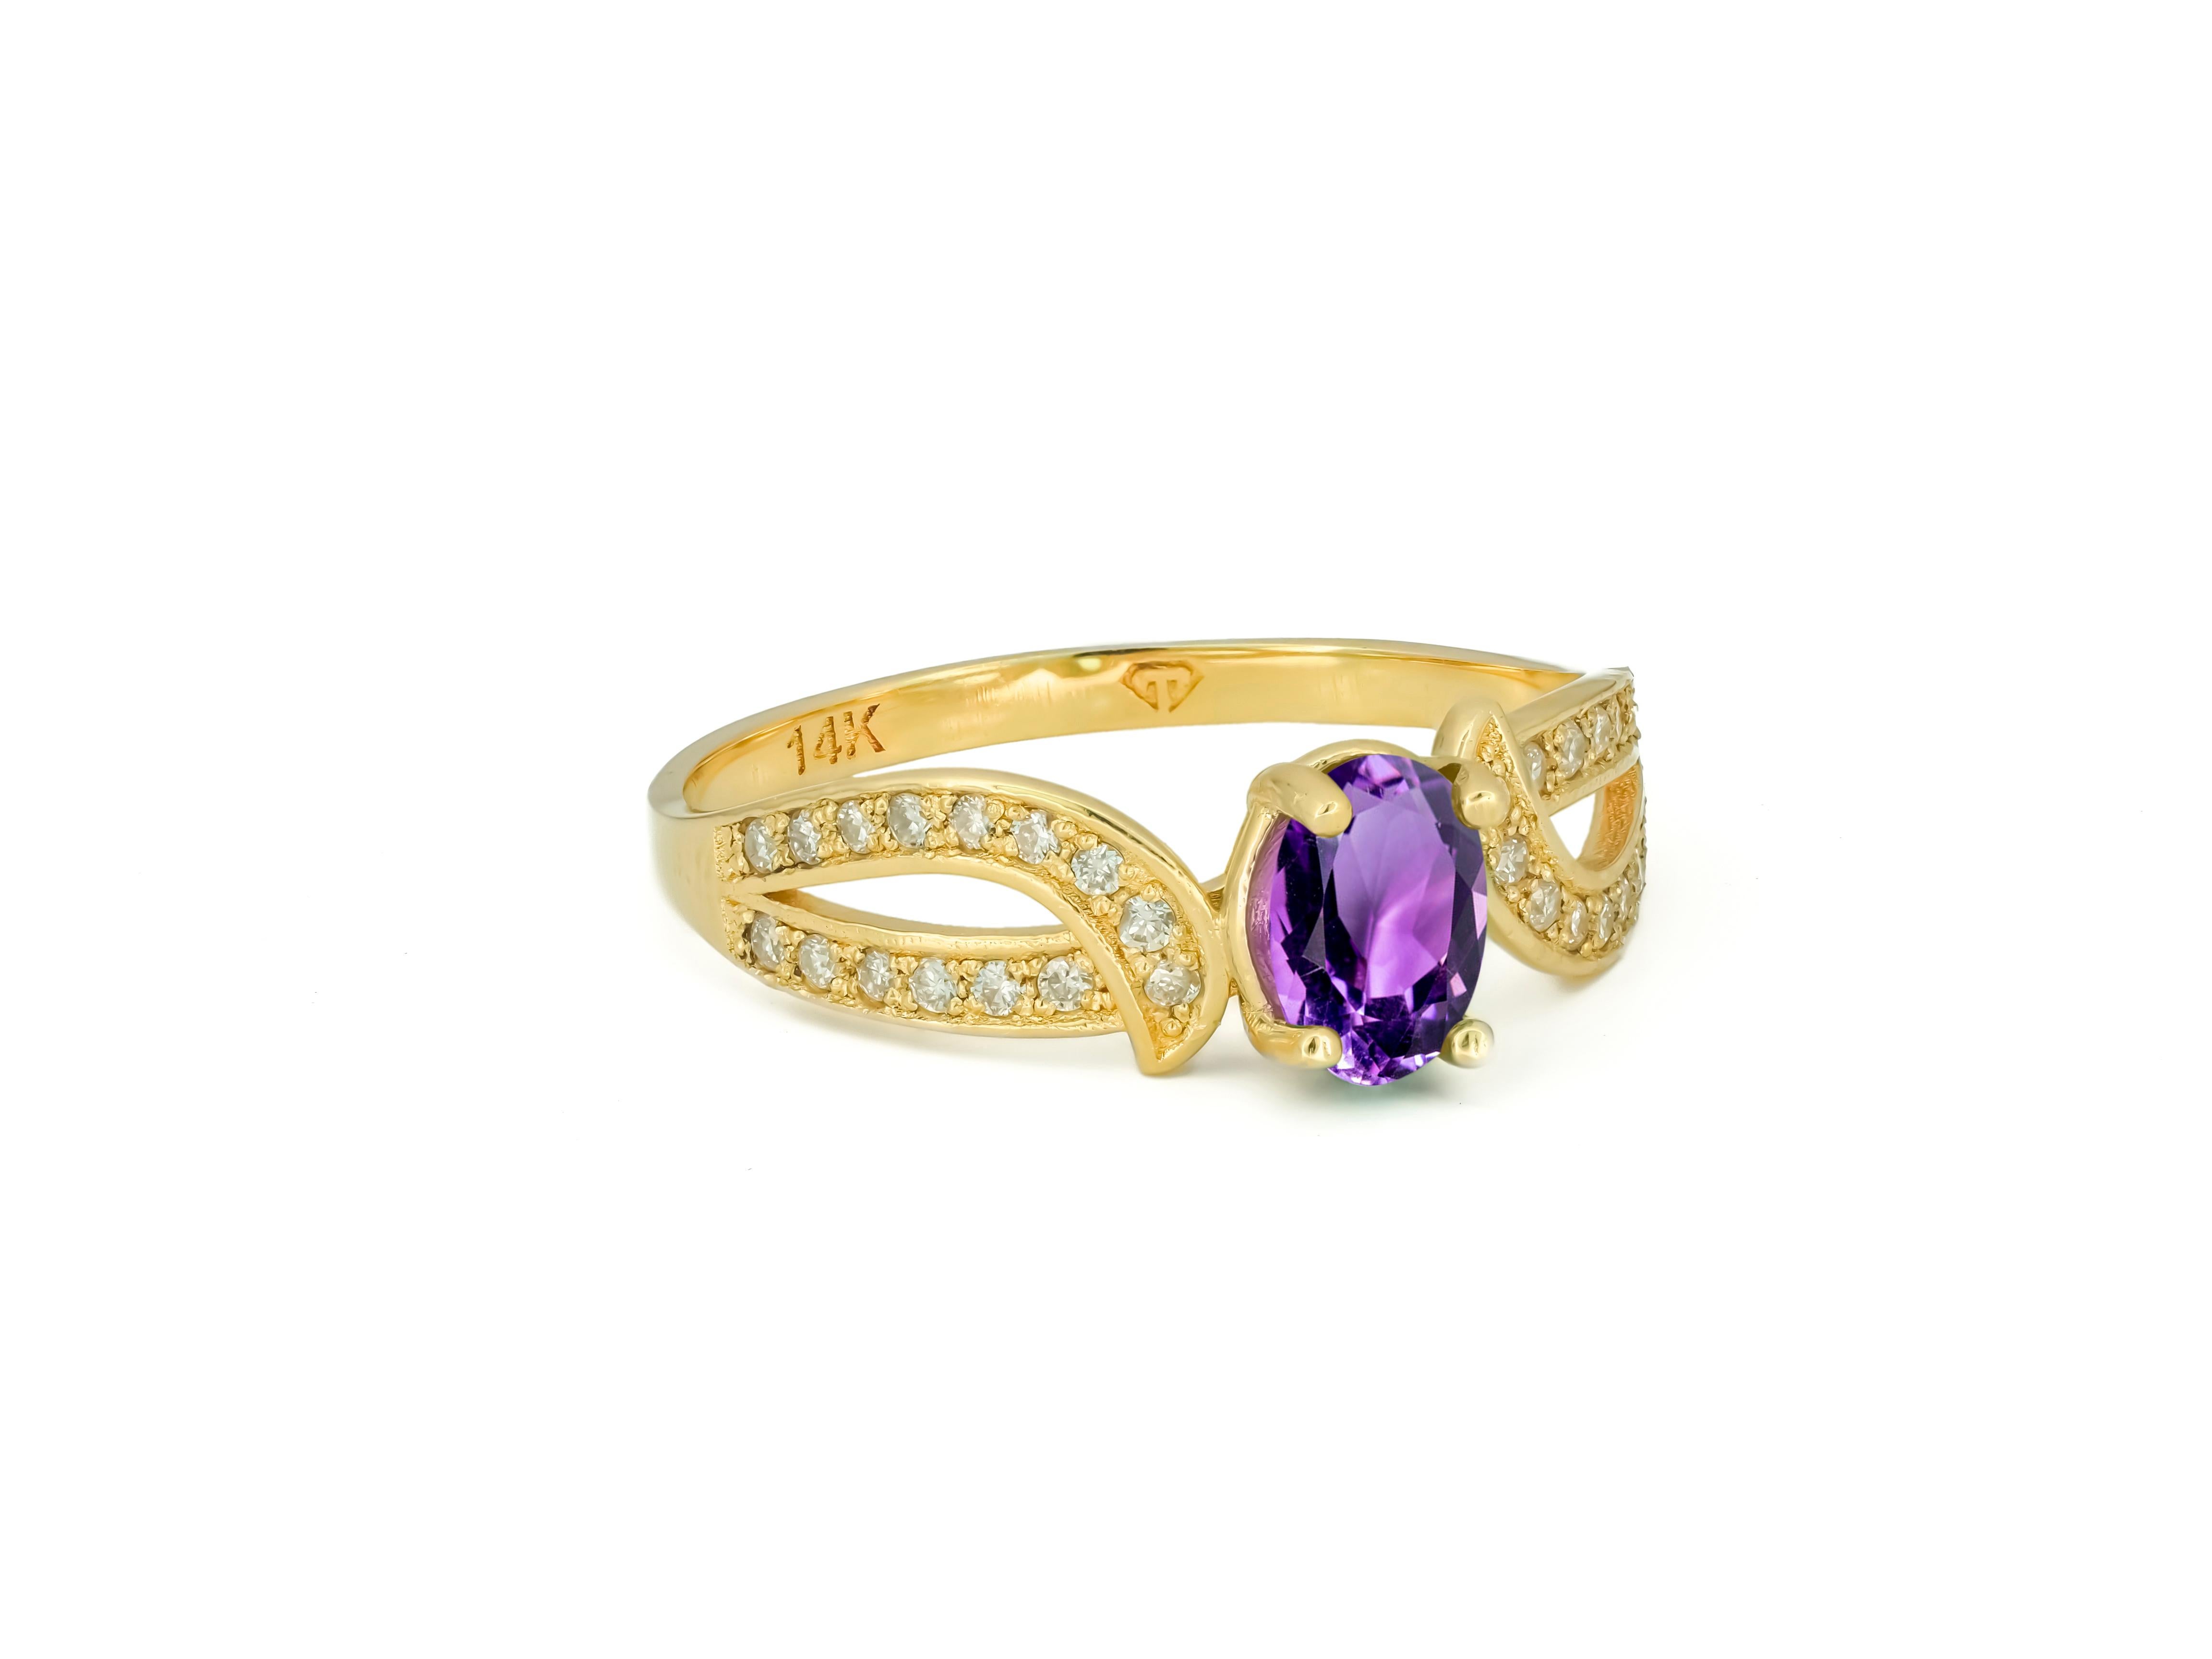 14k yellow gold amethyst ring with diamond accents